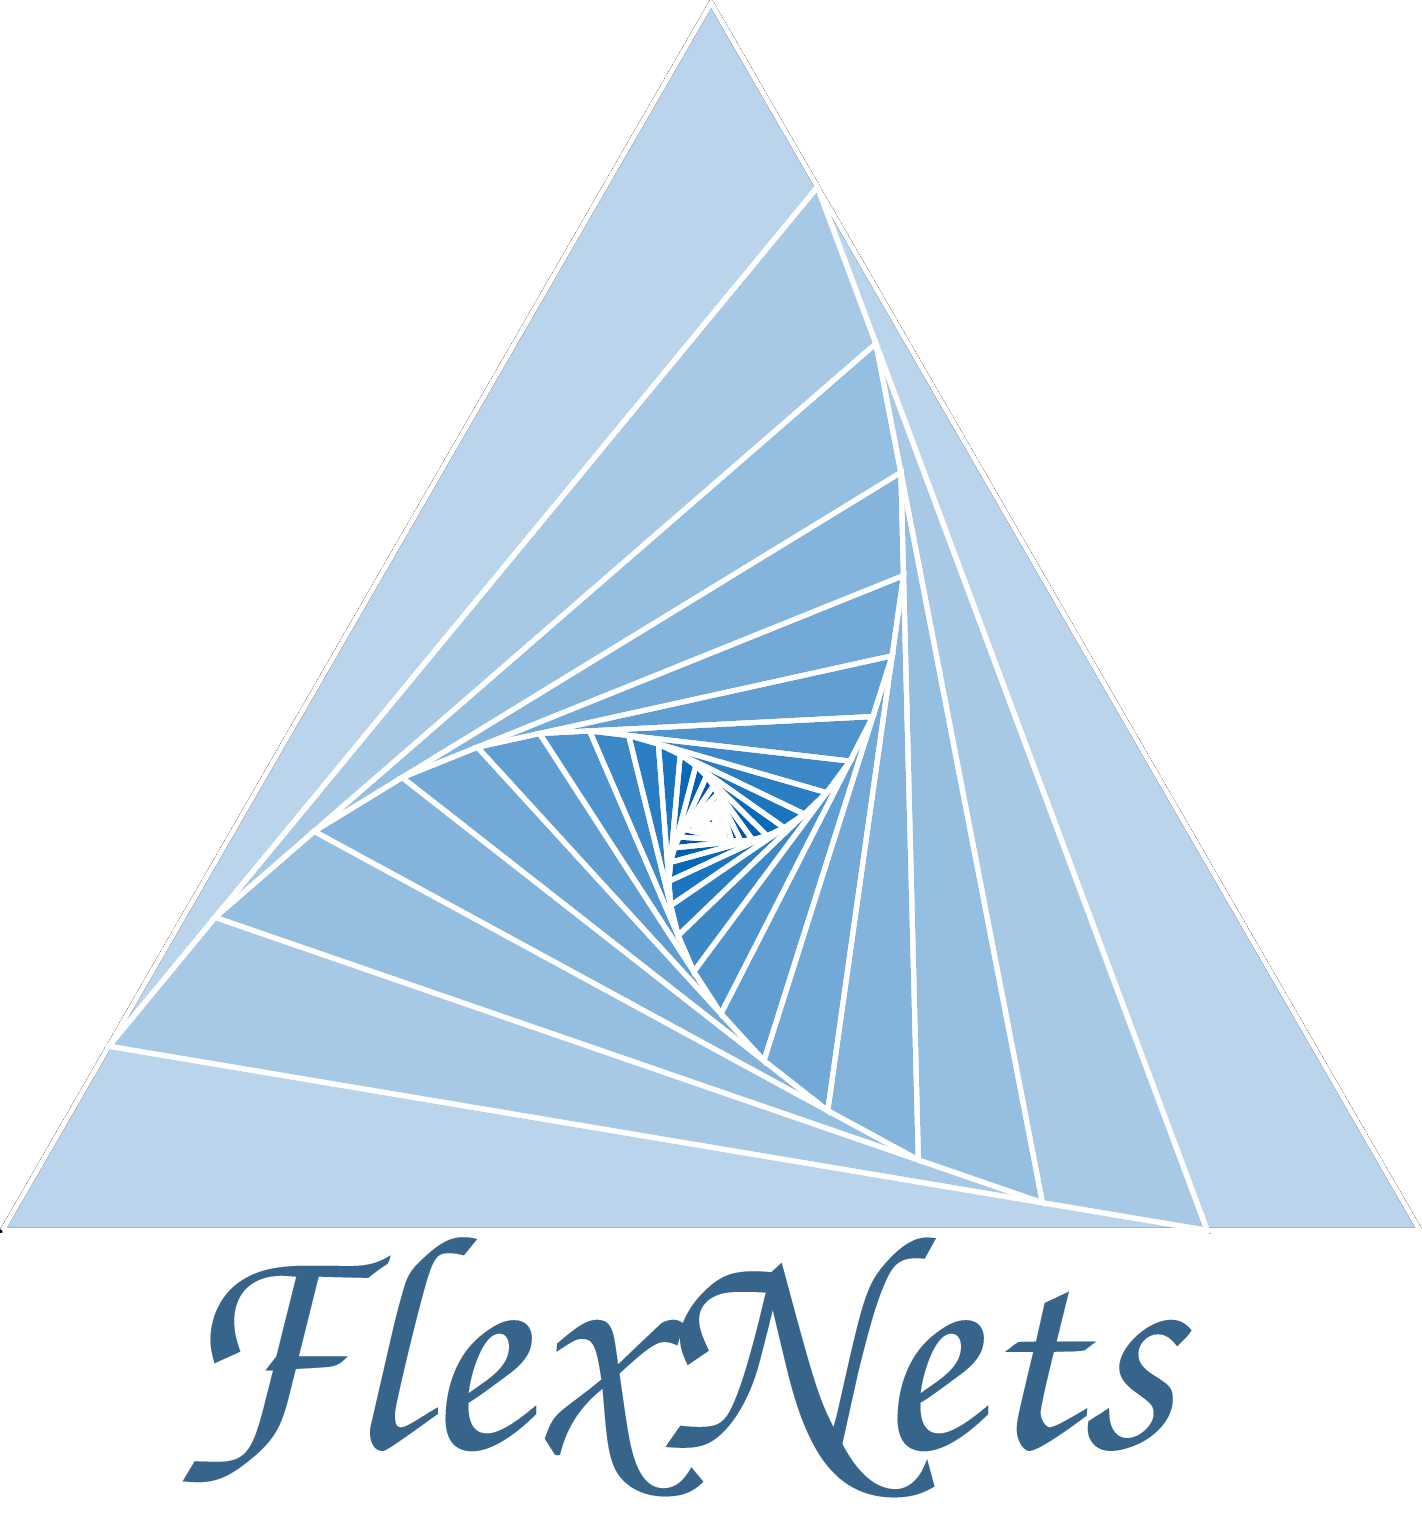 Workshop on Flexible and Agile Networks: 5G and Beyond (FlexNets)